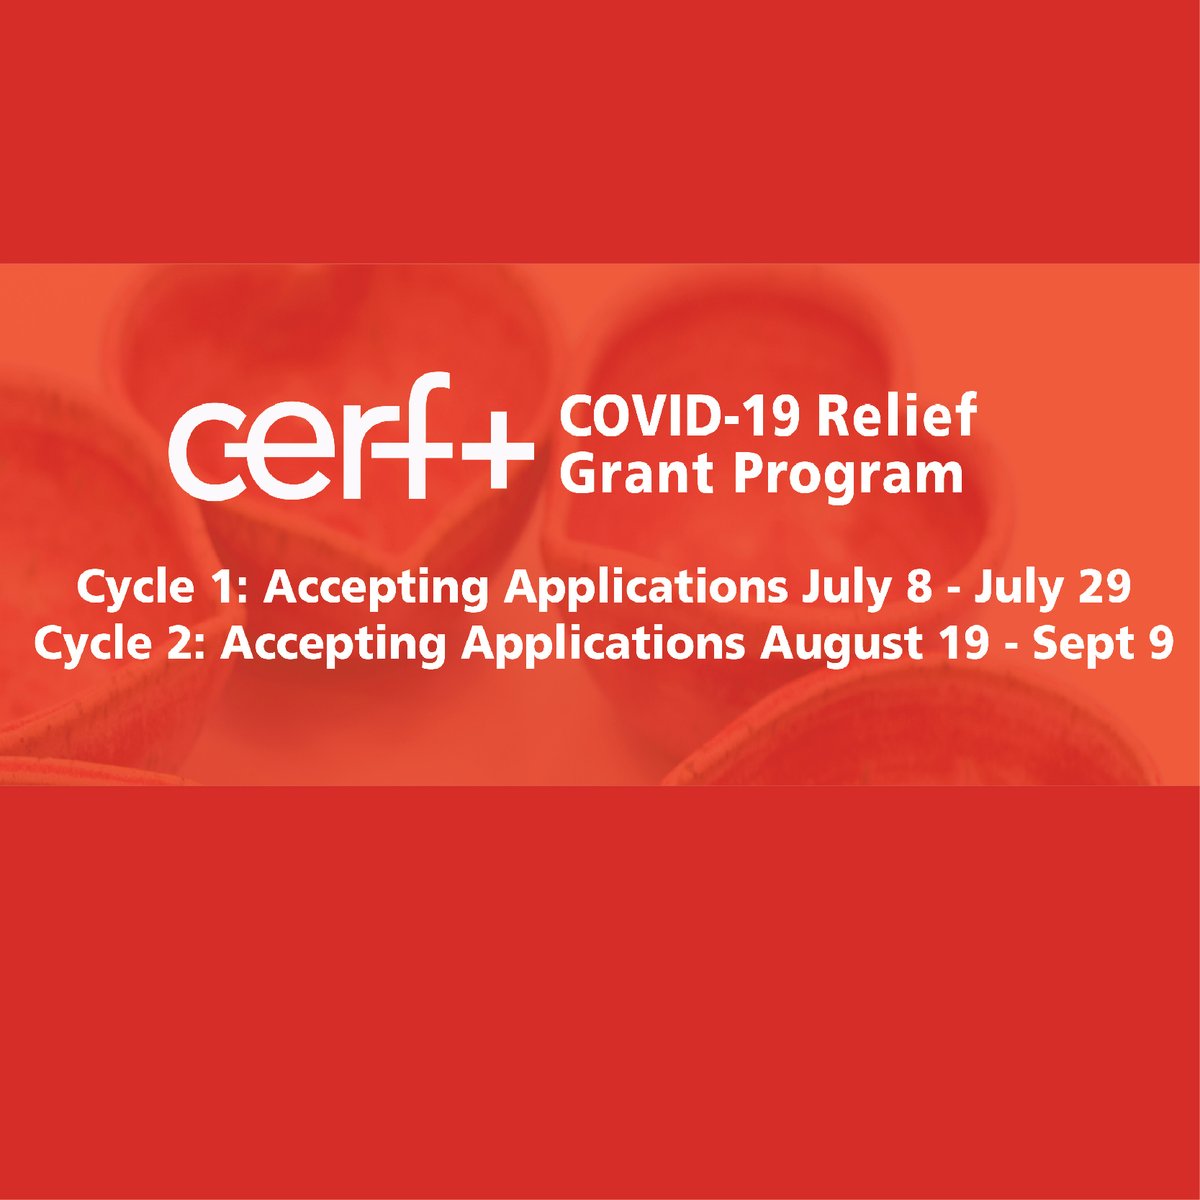 CRAFT ARTISTS - Applications for Round 1 are now being accepted! Click here to apply for a COVID-19 Relief Grant from CERF+: cerfplus.org/cerf-covid-19-…
__
#COVIDrelief #covidrecovery #artistgrant #artist #artfunding #emergencygrant